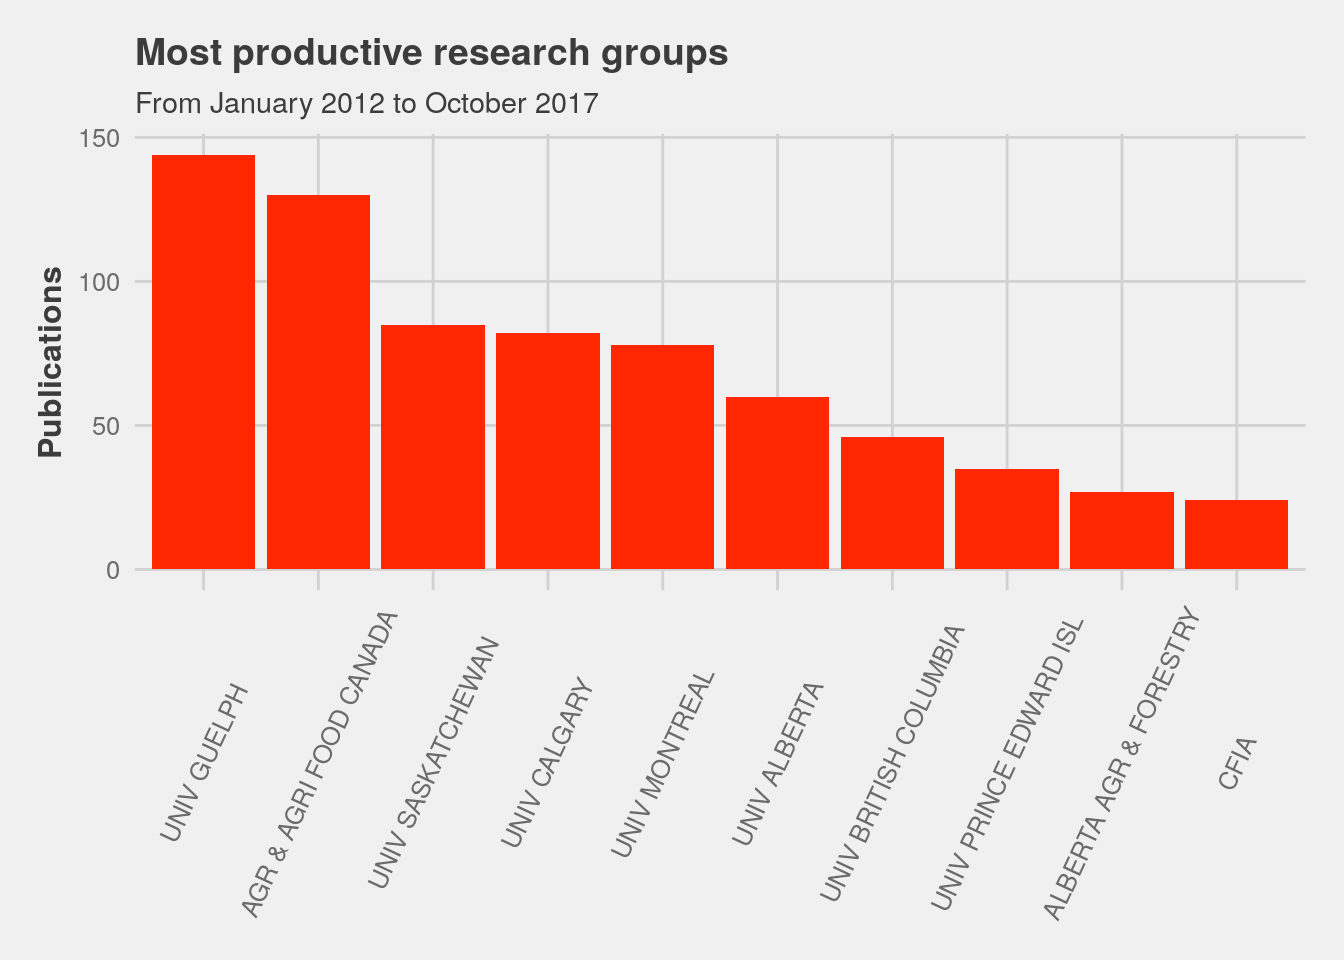 The 10 most productive research groups.